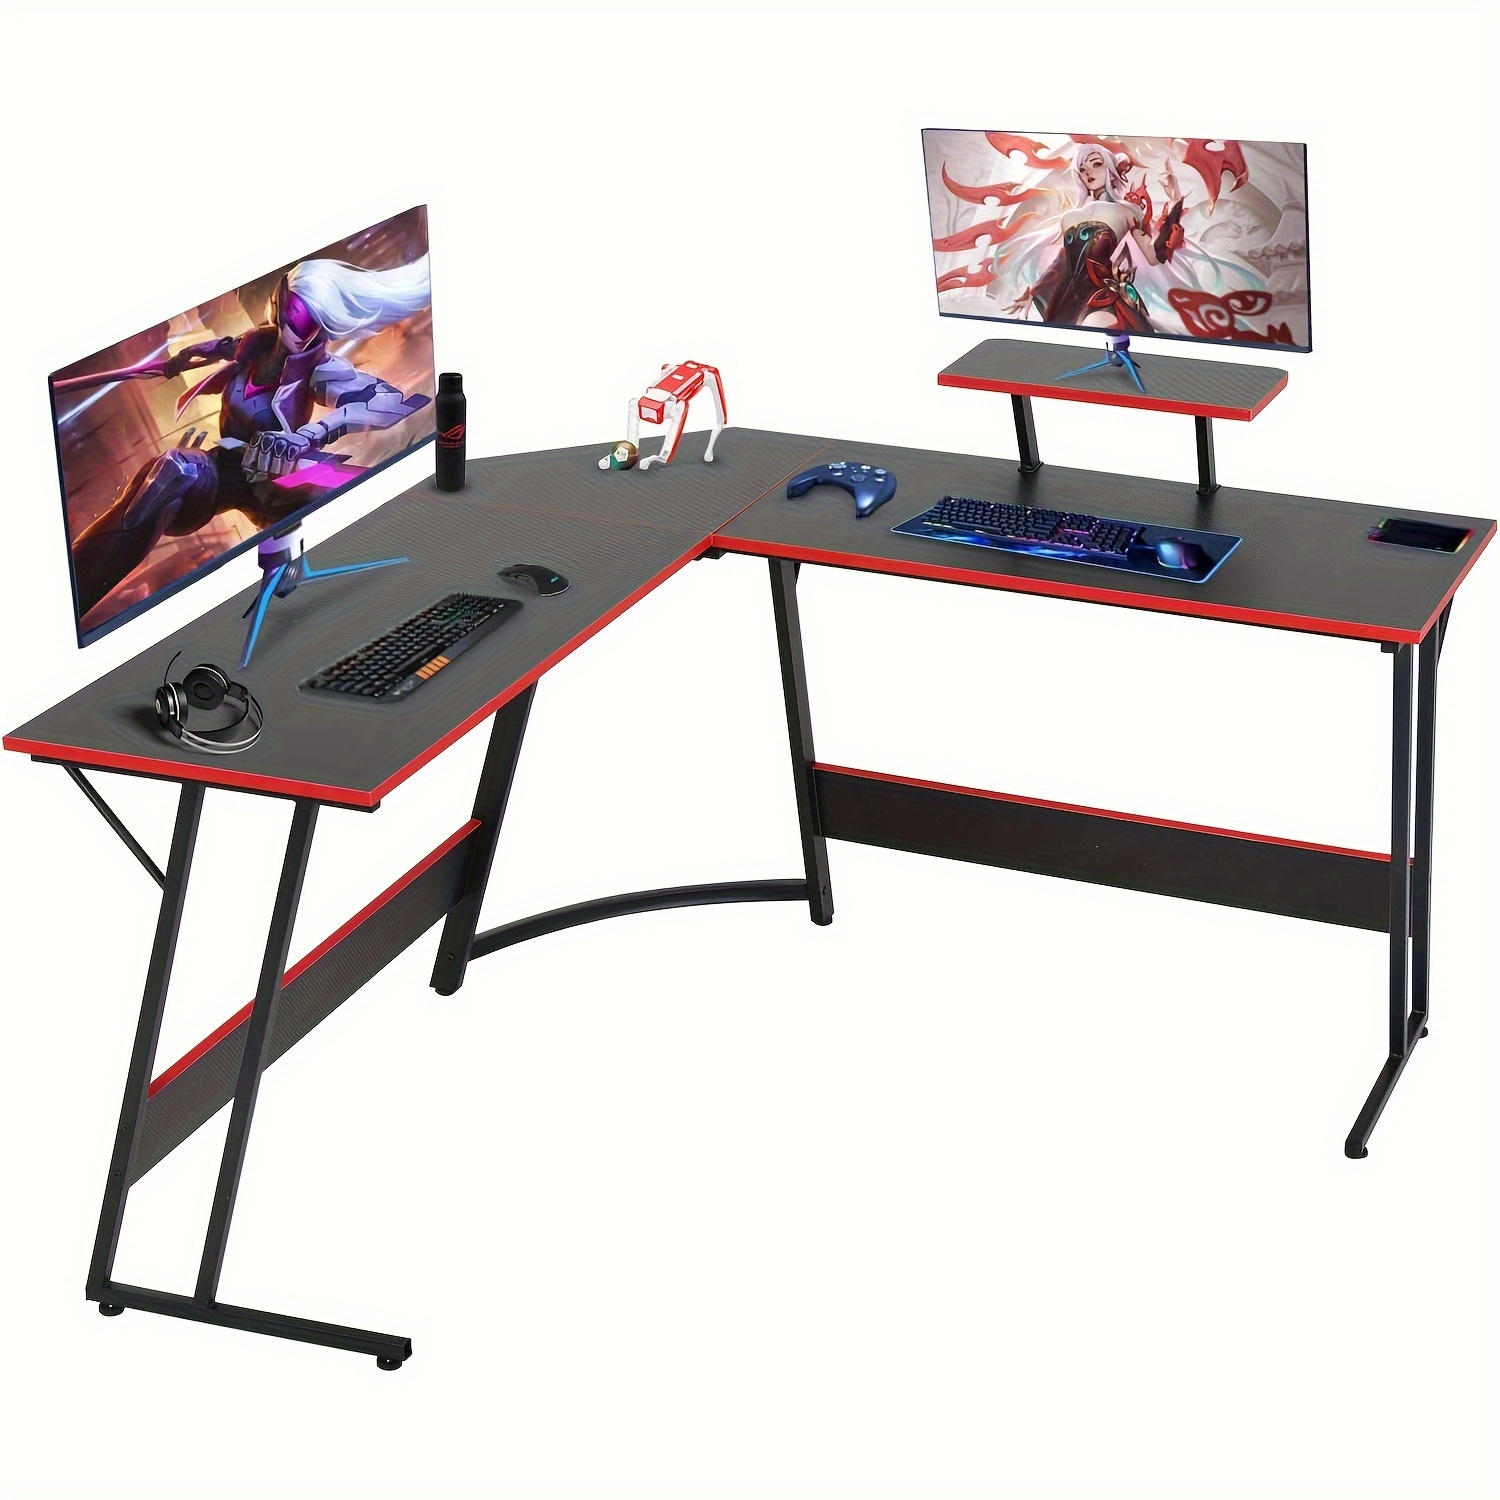 

Corner Computer Desk, L Shape Desk, Gaming Desk With Large Monitor Stand And Carbon Fiber Surface, Home Office Study Writing Workstation